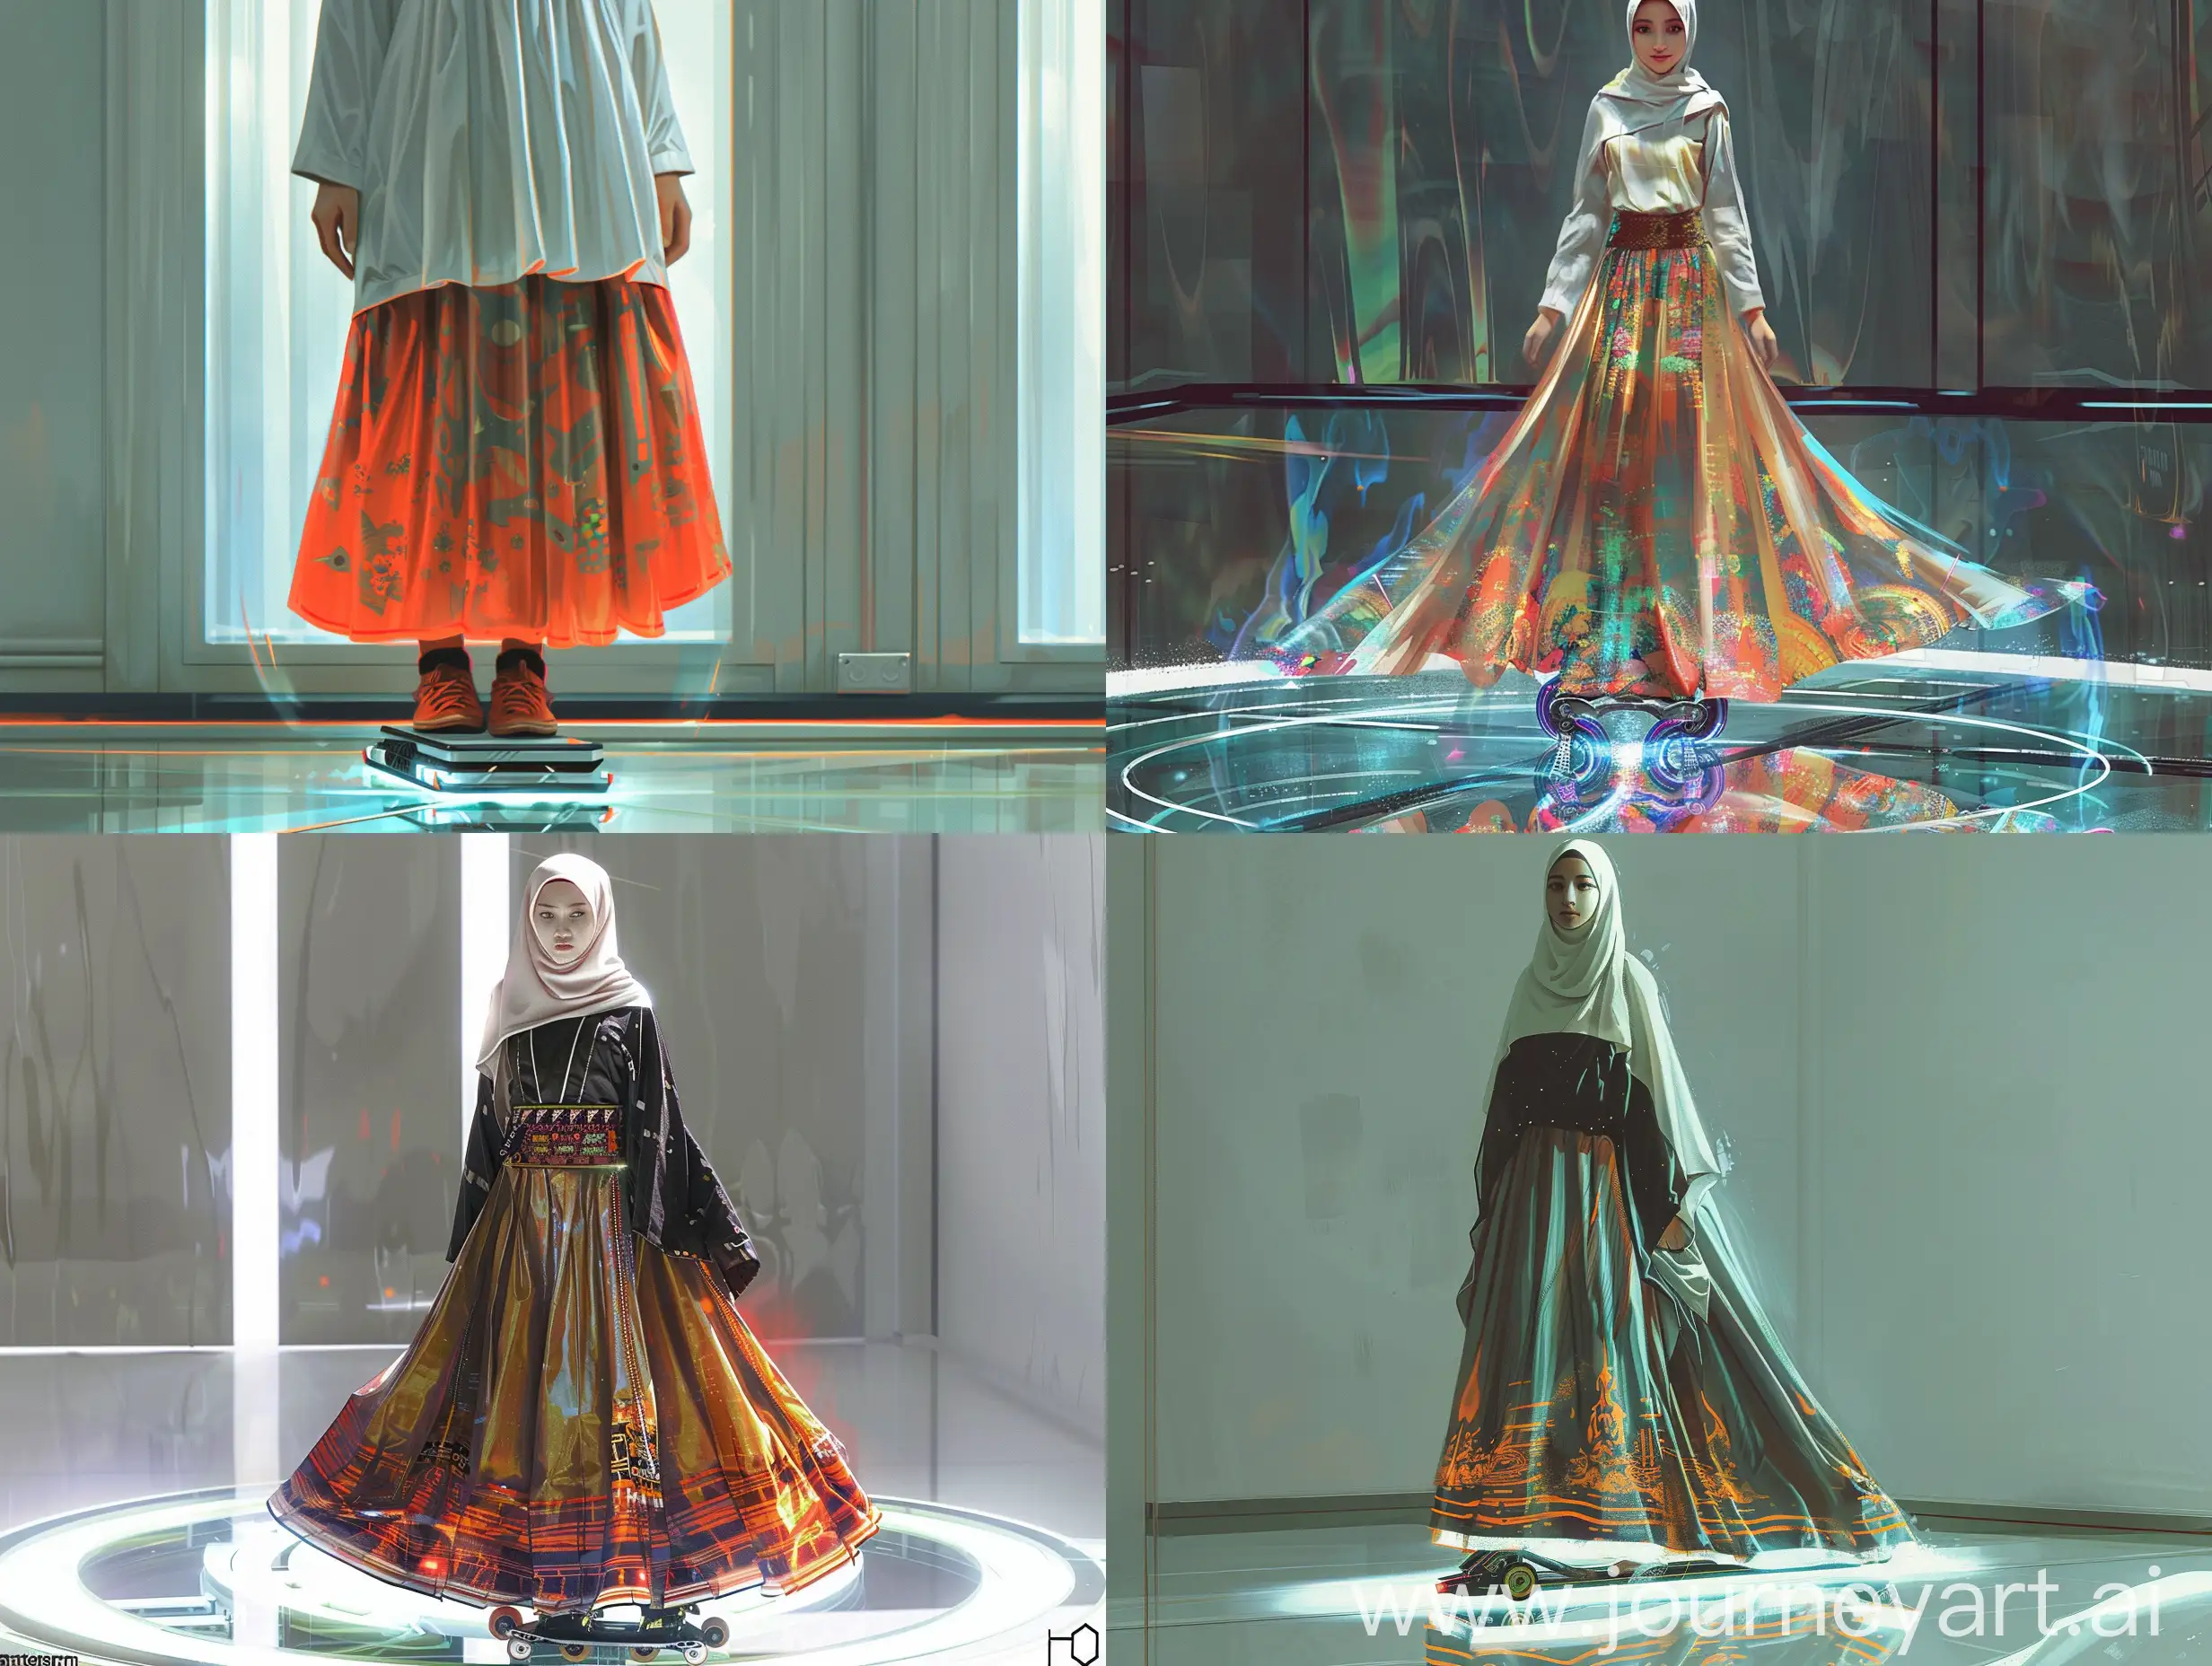 by Artgerm, digital painting, a 1800s ninja beauty young Indonesian muslim college girl in glass floor standing at a futuristic inline skate, simple minimalist futuristic design. Graphic scheme long skirt, with striking colors. the person's face is charming and looks at me, detailed, Japanese attire, swing lighting kusanagi sword bender technique.